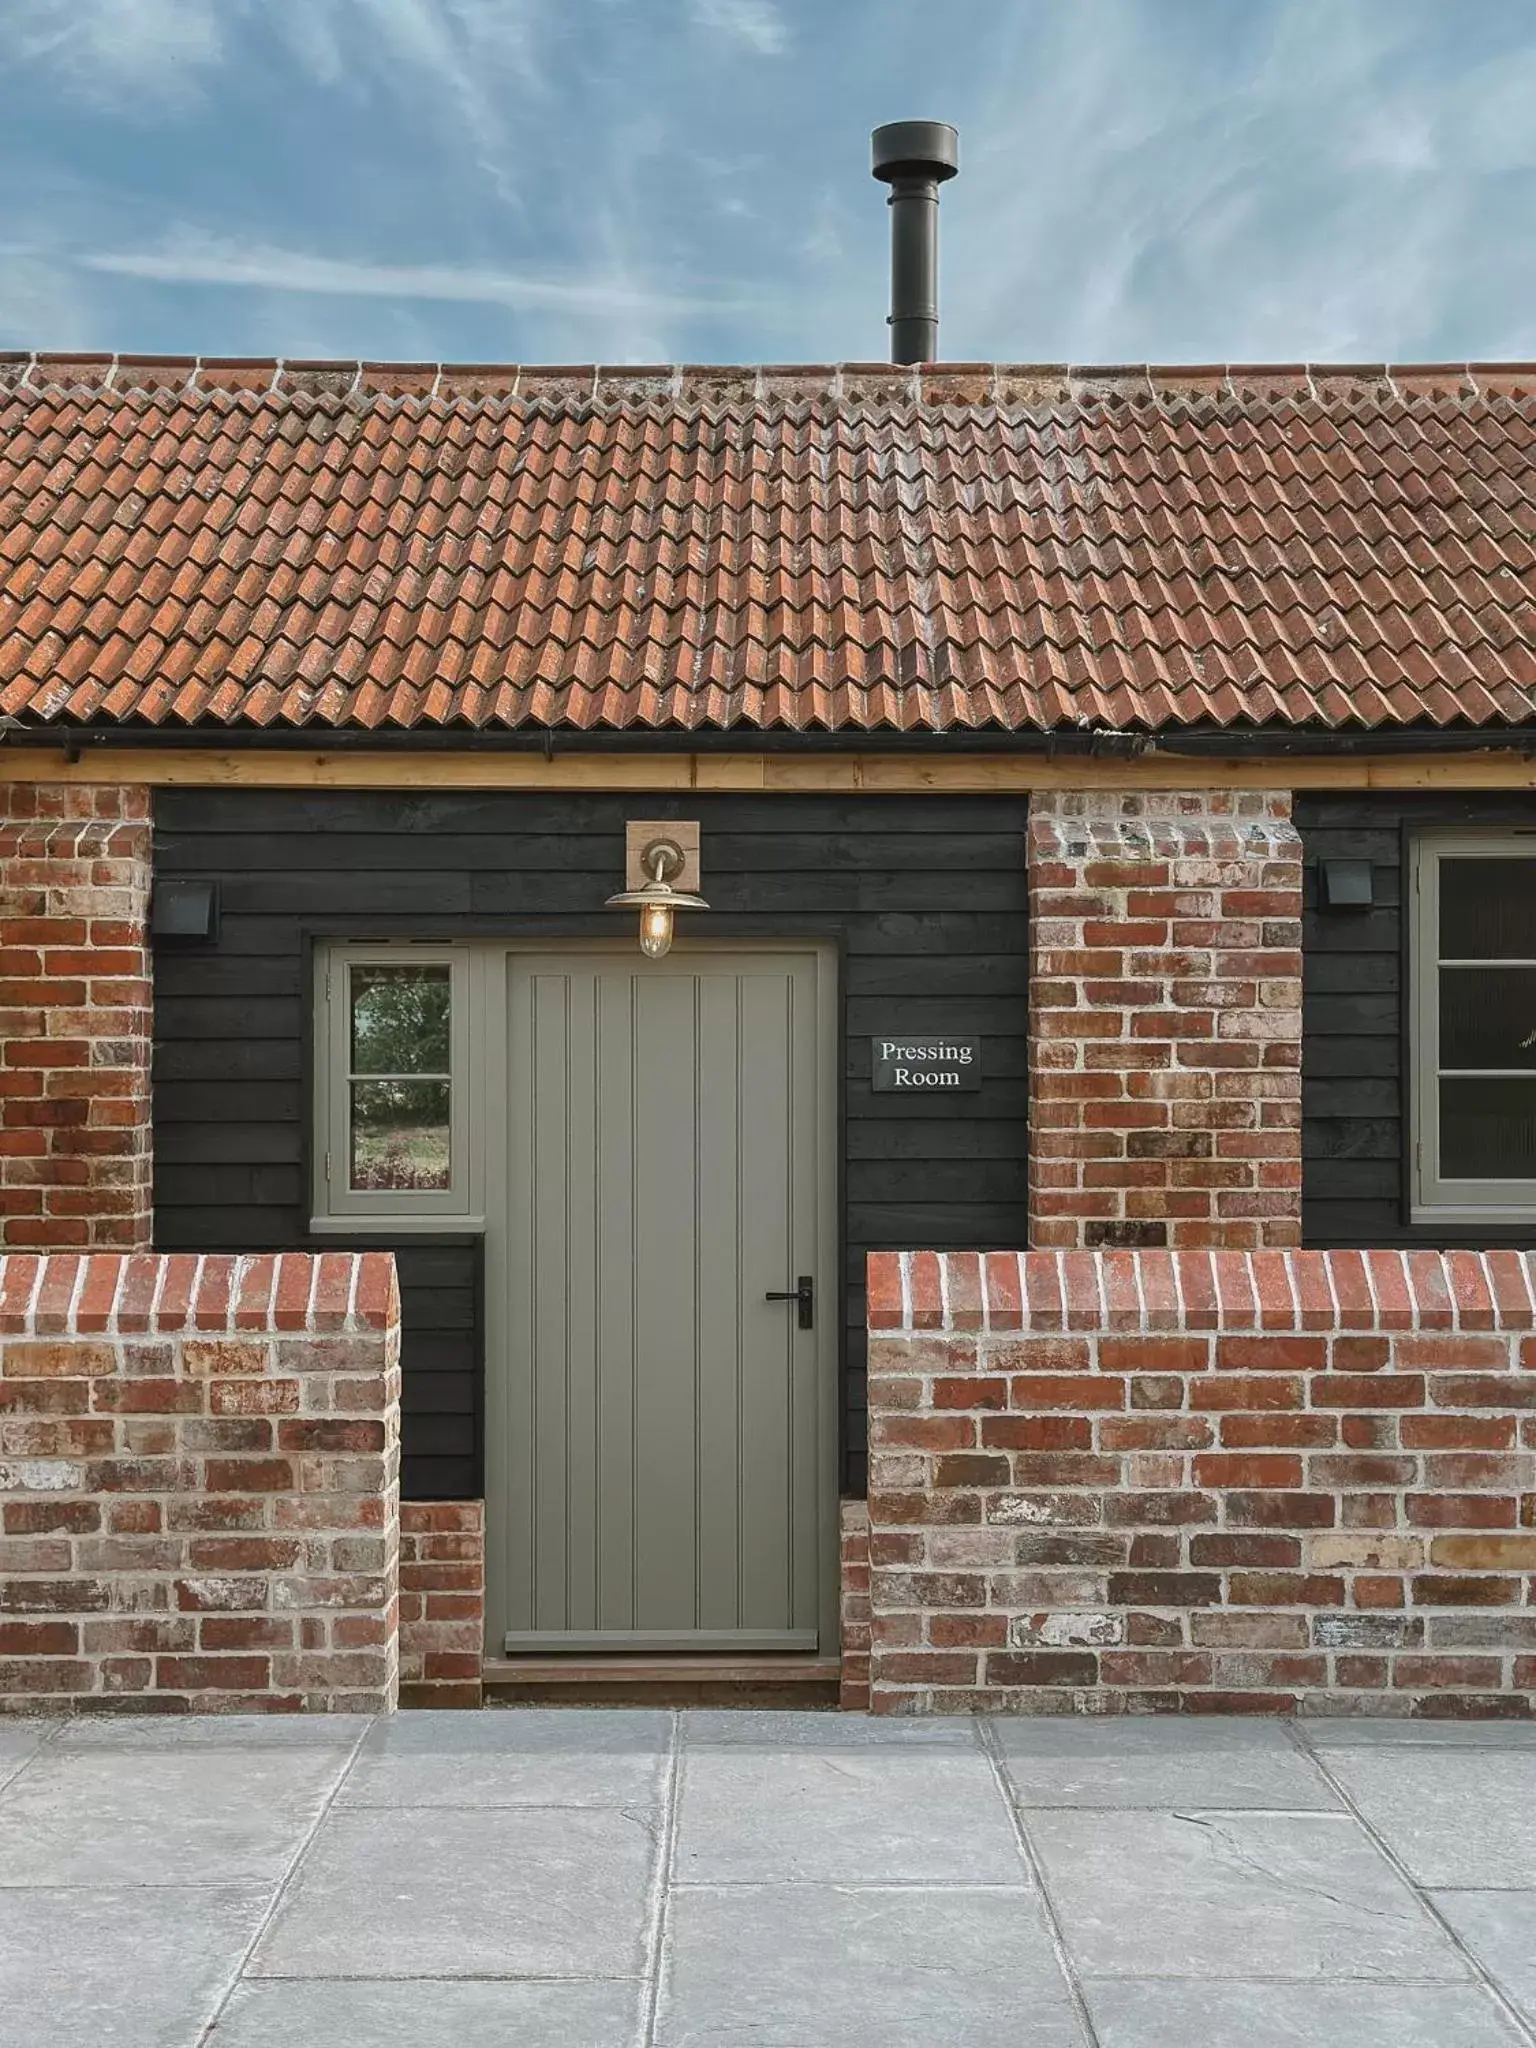 Property building in Outbuildings Dorset